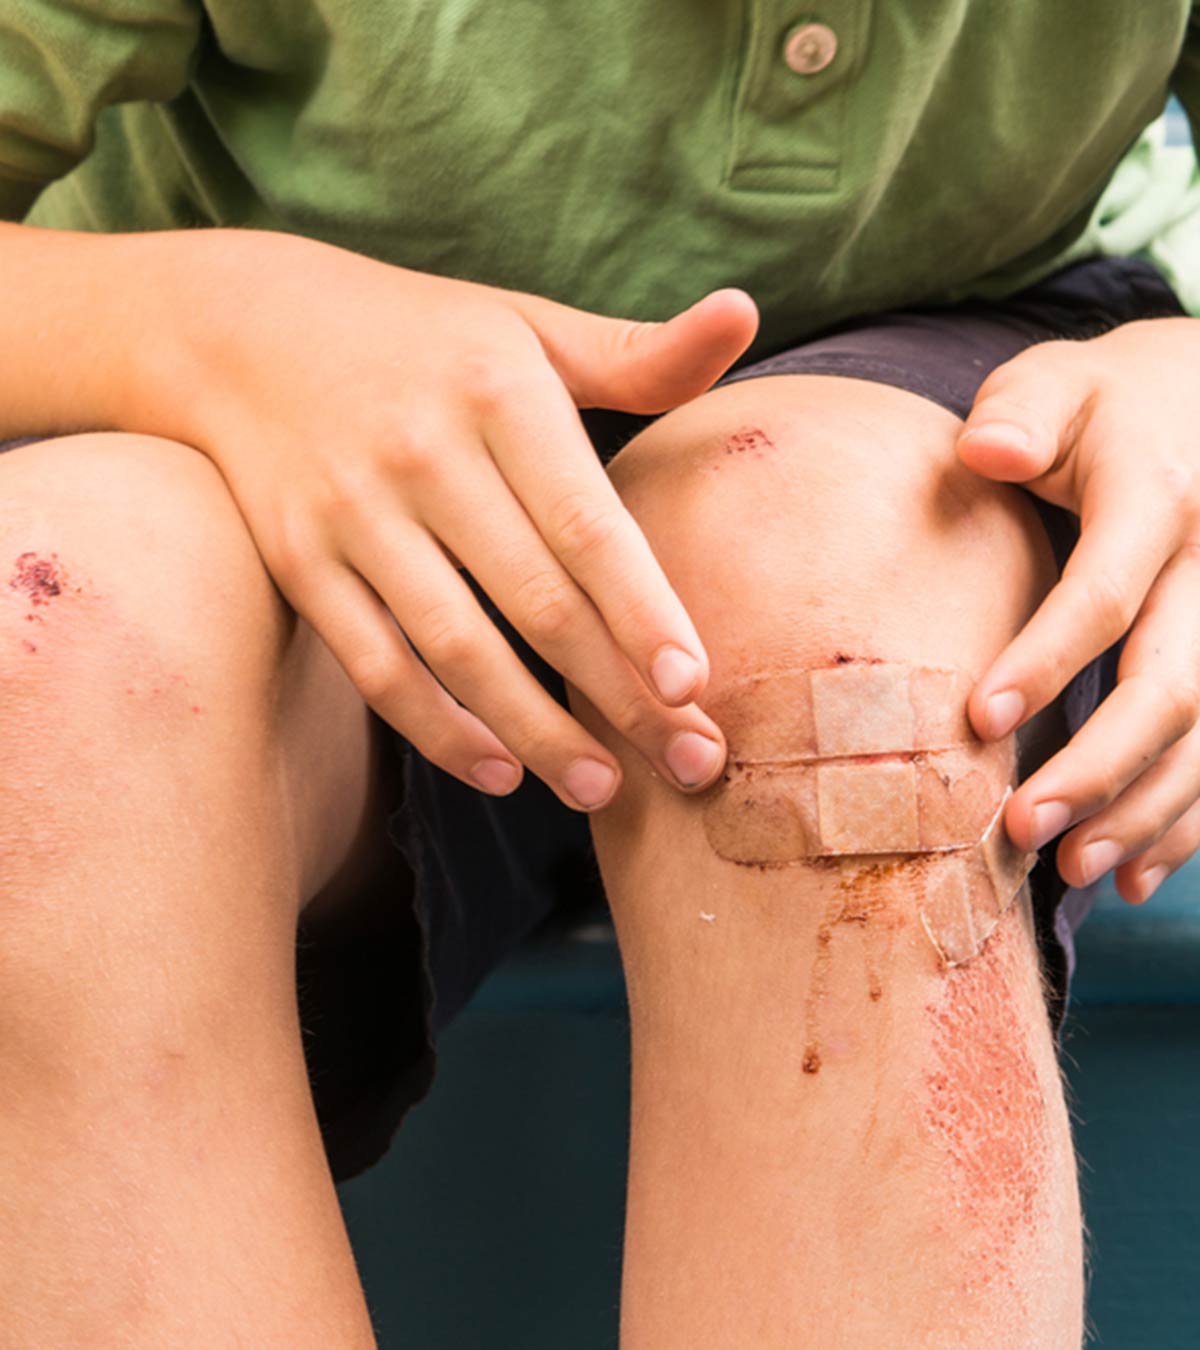 Abnormal Bruising In Children: Signs, Causes And Treatments